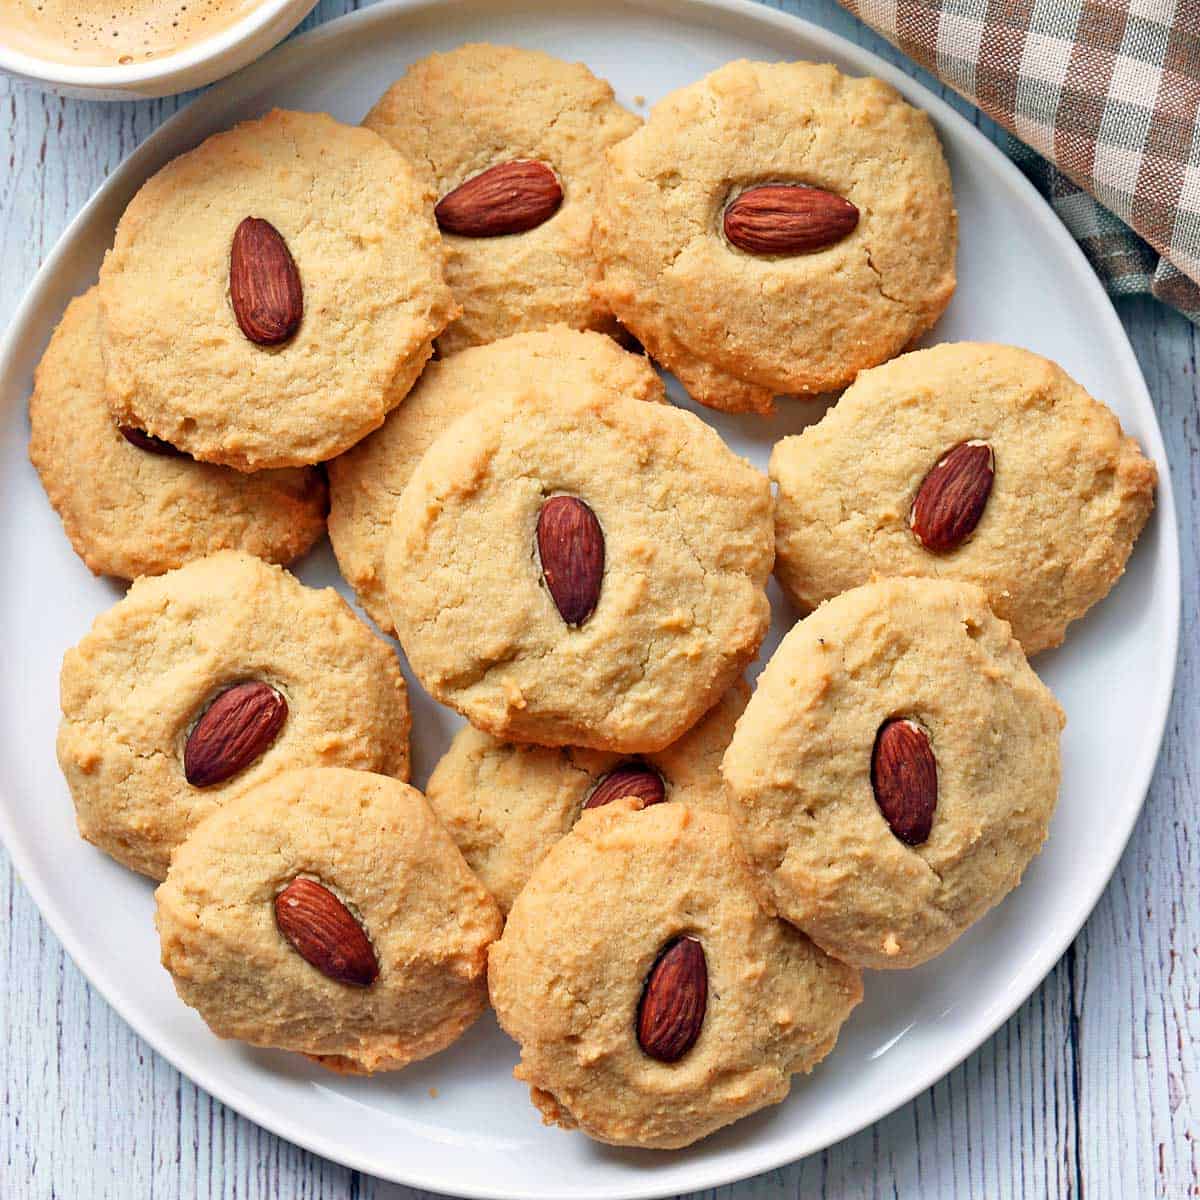 Almond flour cookies served with a cup of coffee.